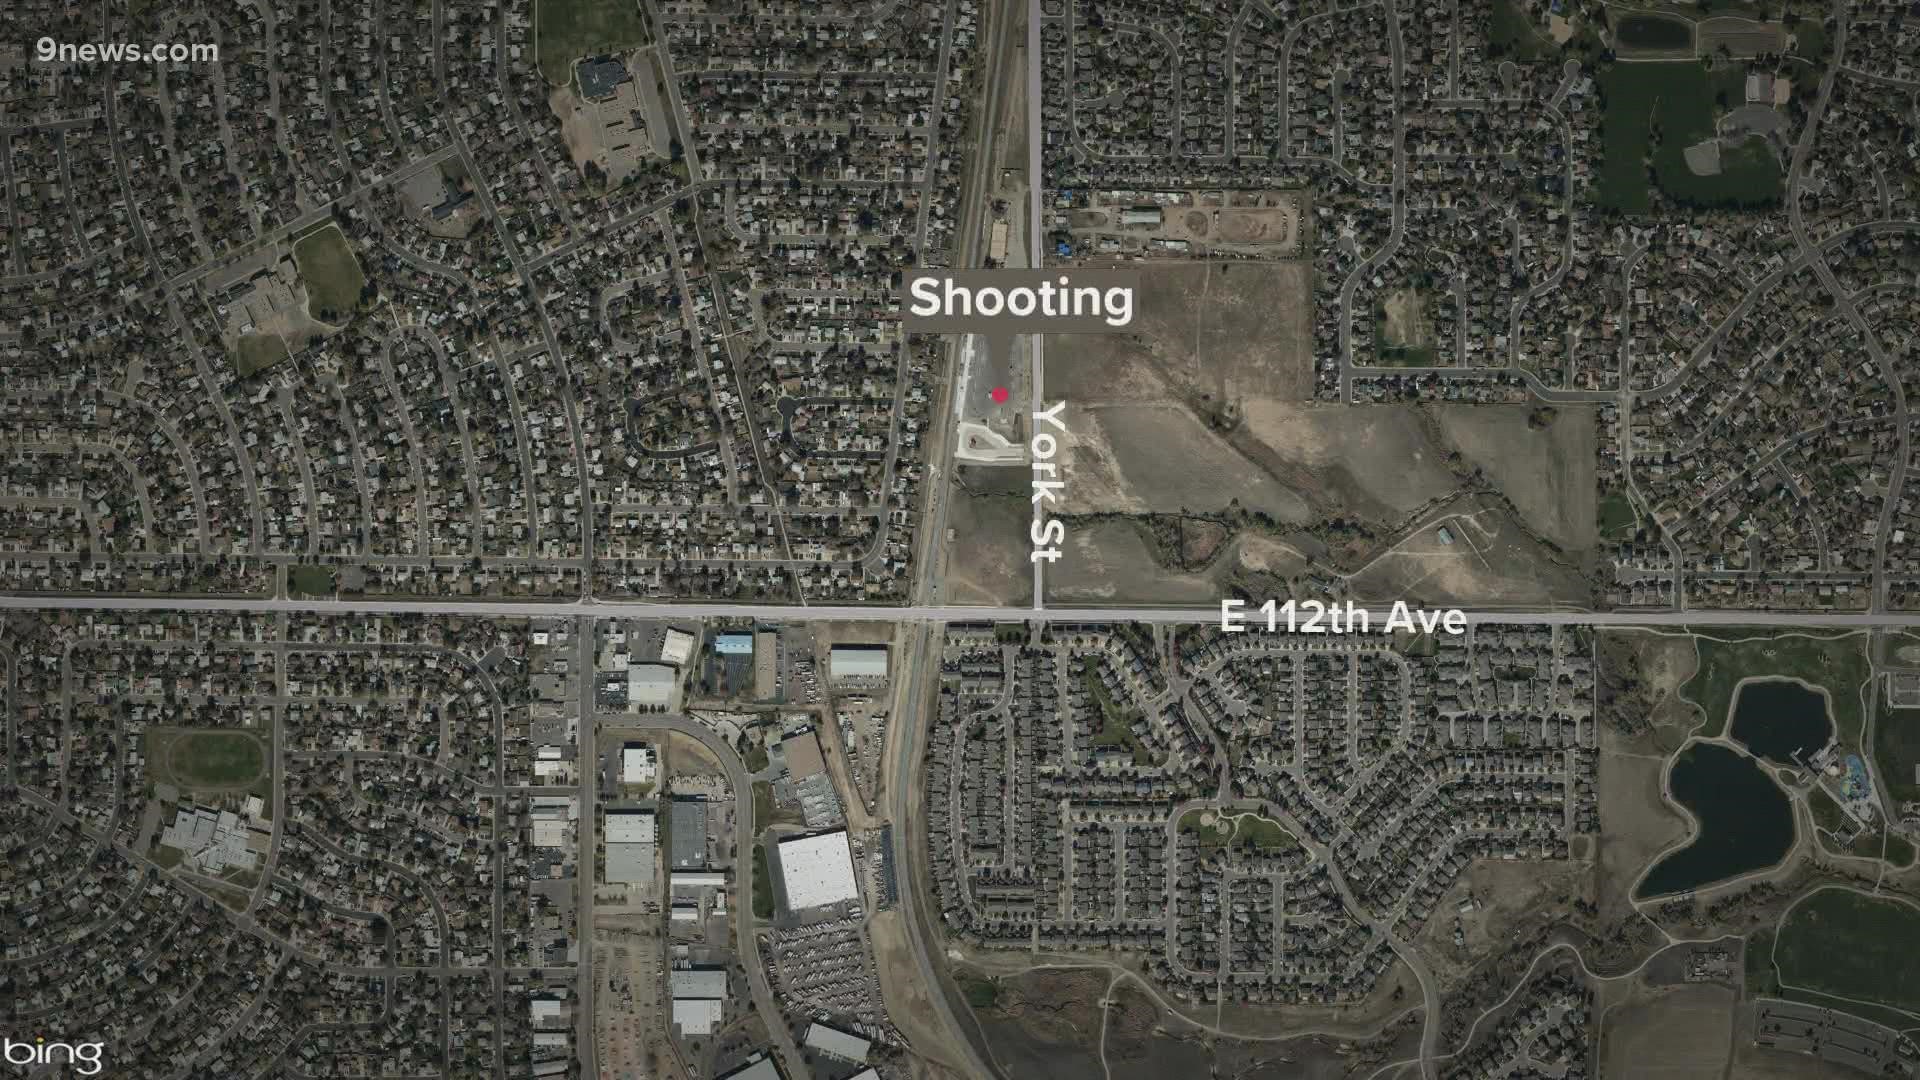 A suspect was arrested in the shooting in the area of York Street and East 112th Avenue, according to Northglenn Police.